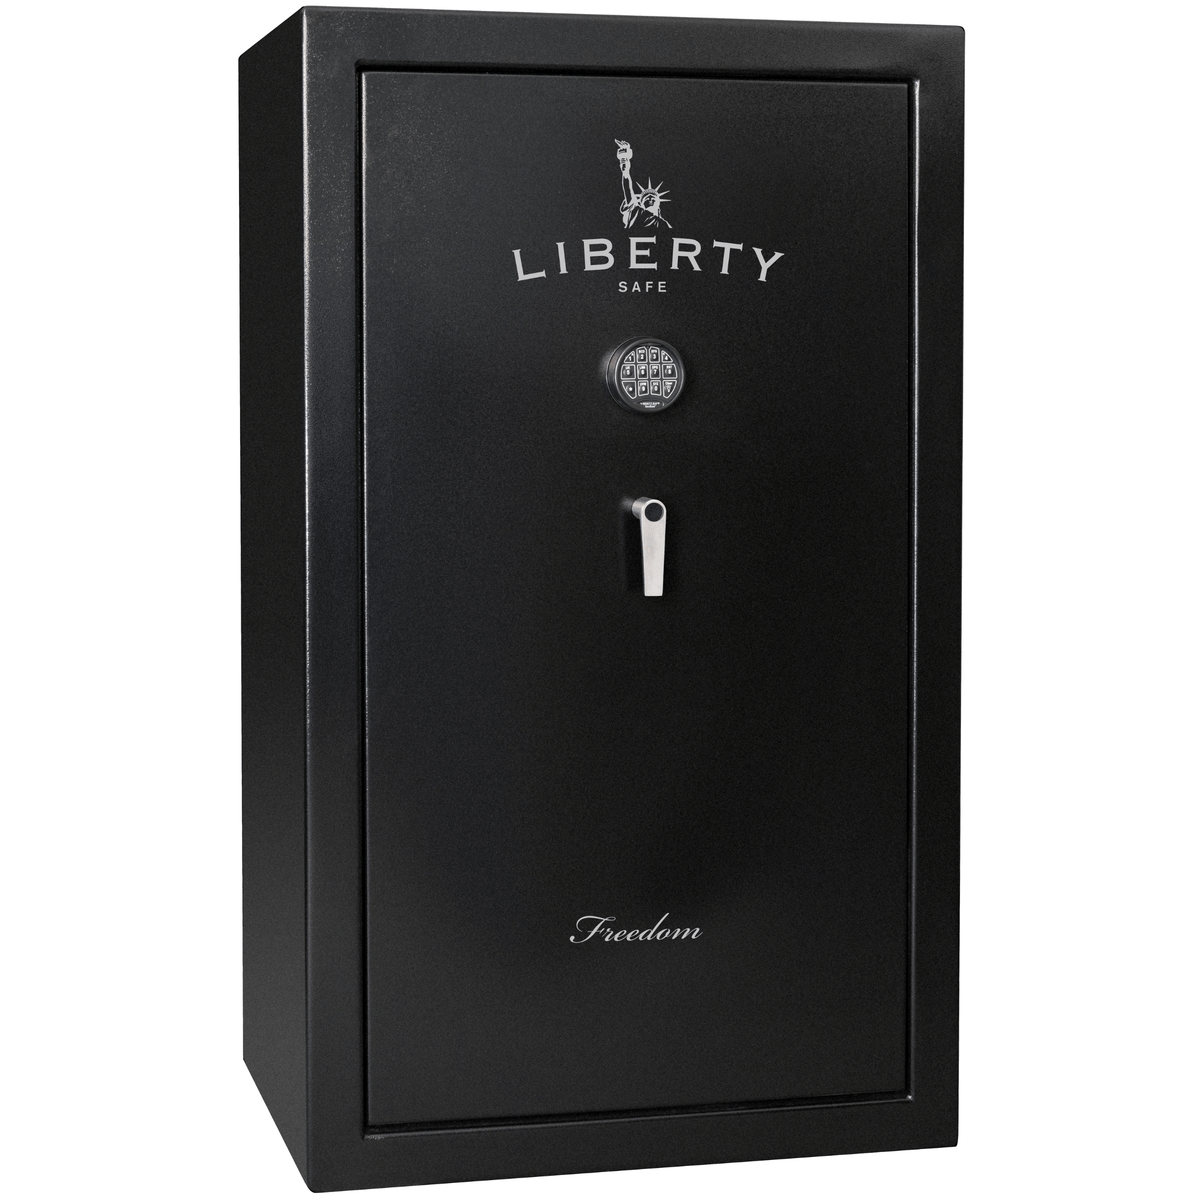 Freedom Series | Level 2 Security | 40 Minute Fire Rating | Liberty Safe Norcal.